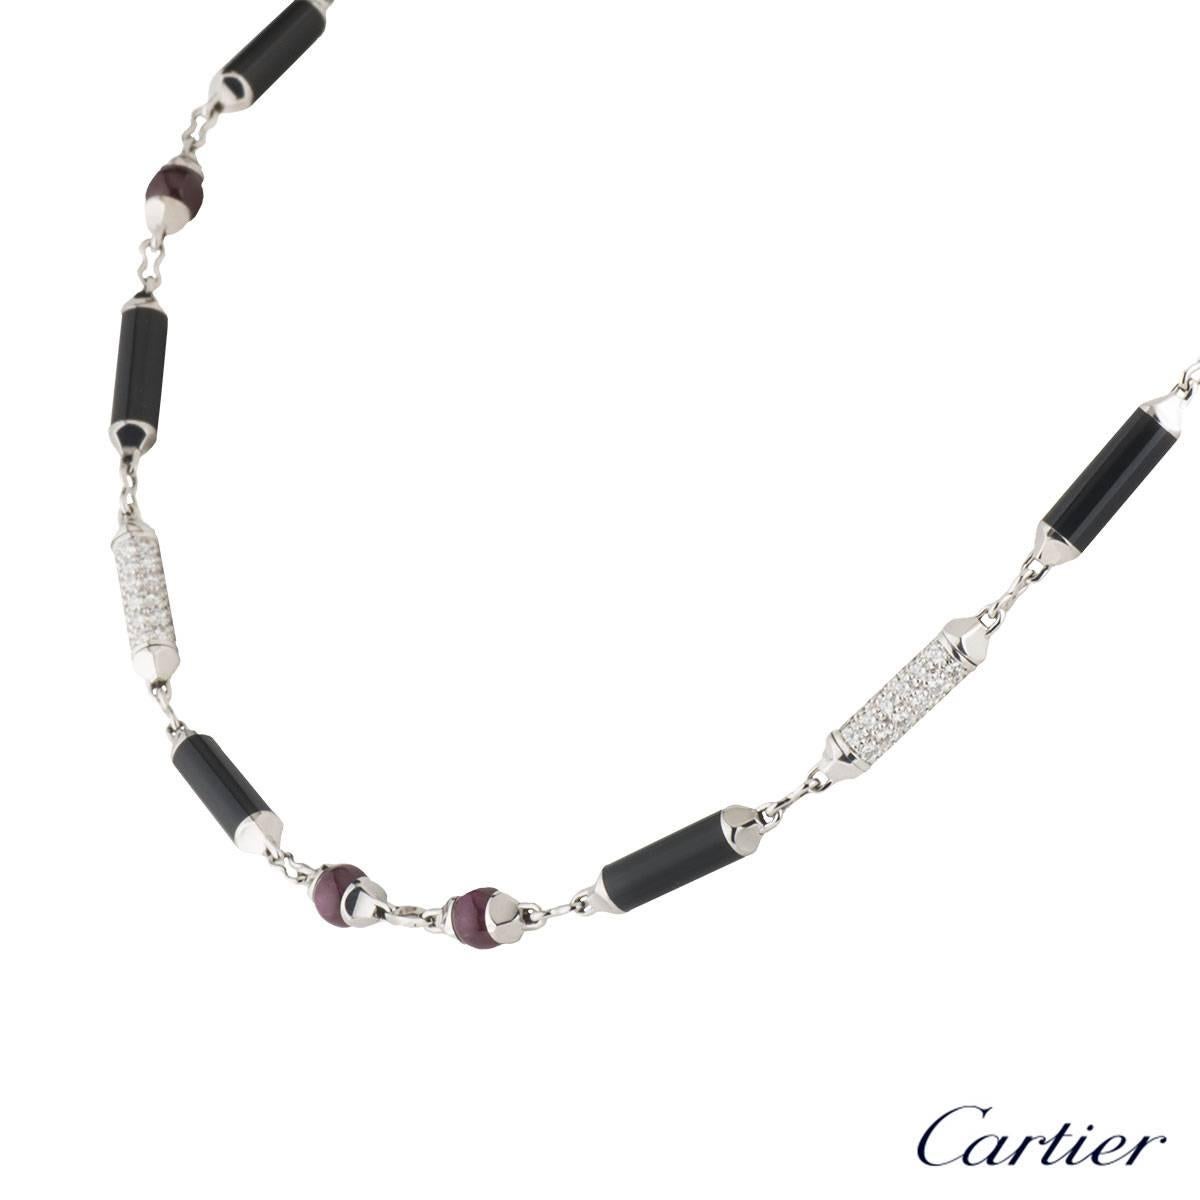 A unique 18k white gold diamond ruby and onyx Cartier necklace from the Le Baiser Du Dragon collection. The bracelet comprises of 15 cylinder bar motifs, 11 with an onyx inlay and 4 with 168 round brilliant cut diamonds. The diamonds have a total